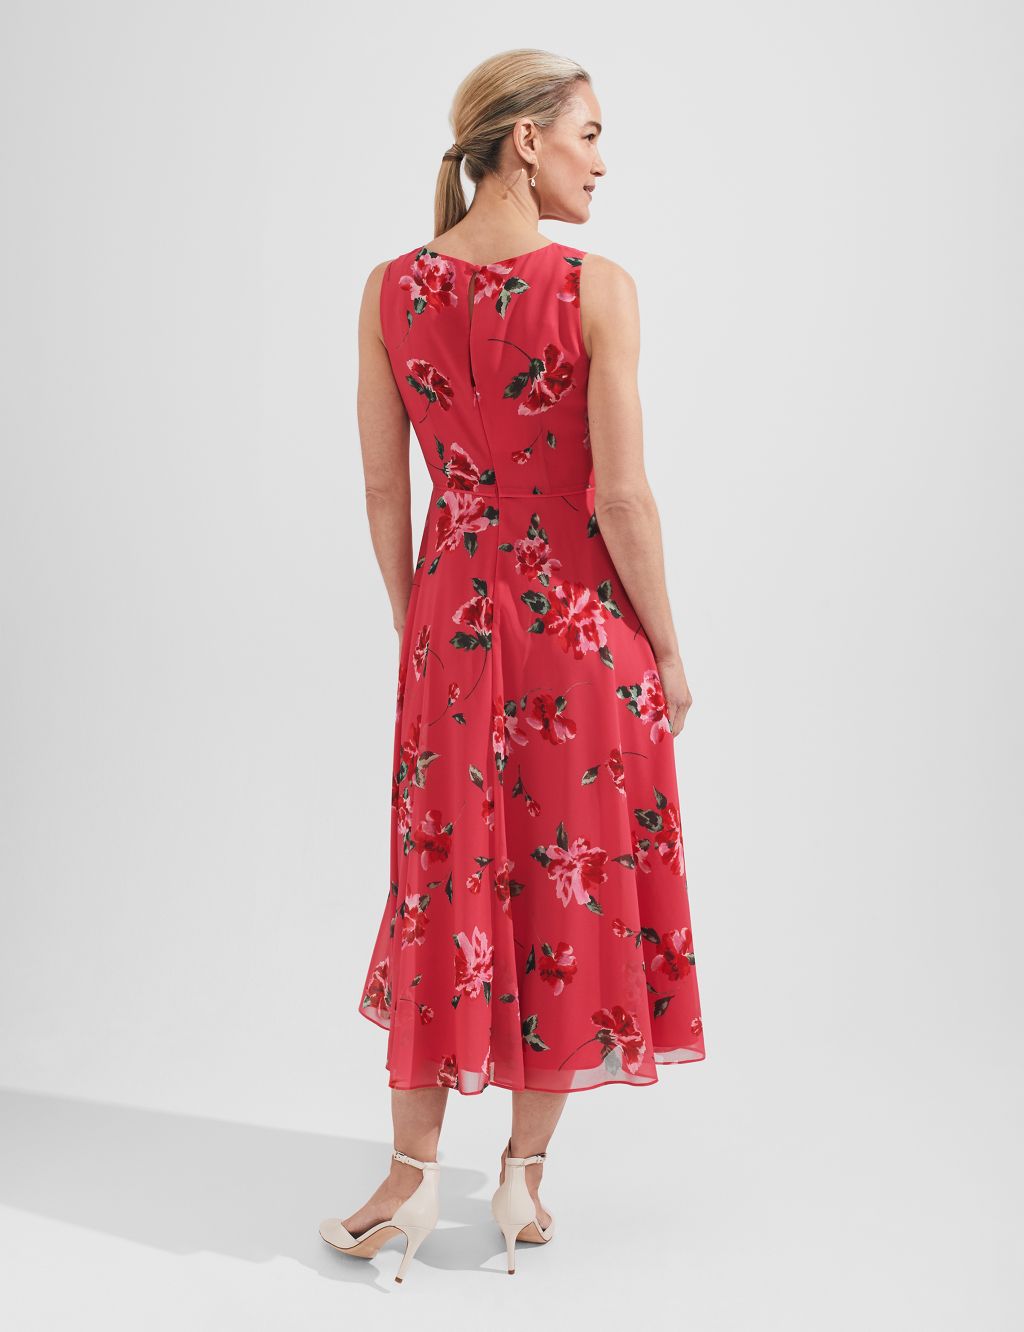 Floral Midaxi Swing Dress image 4